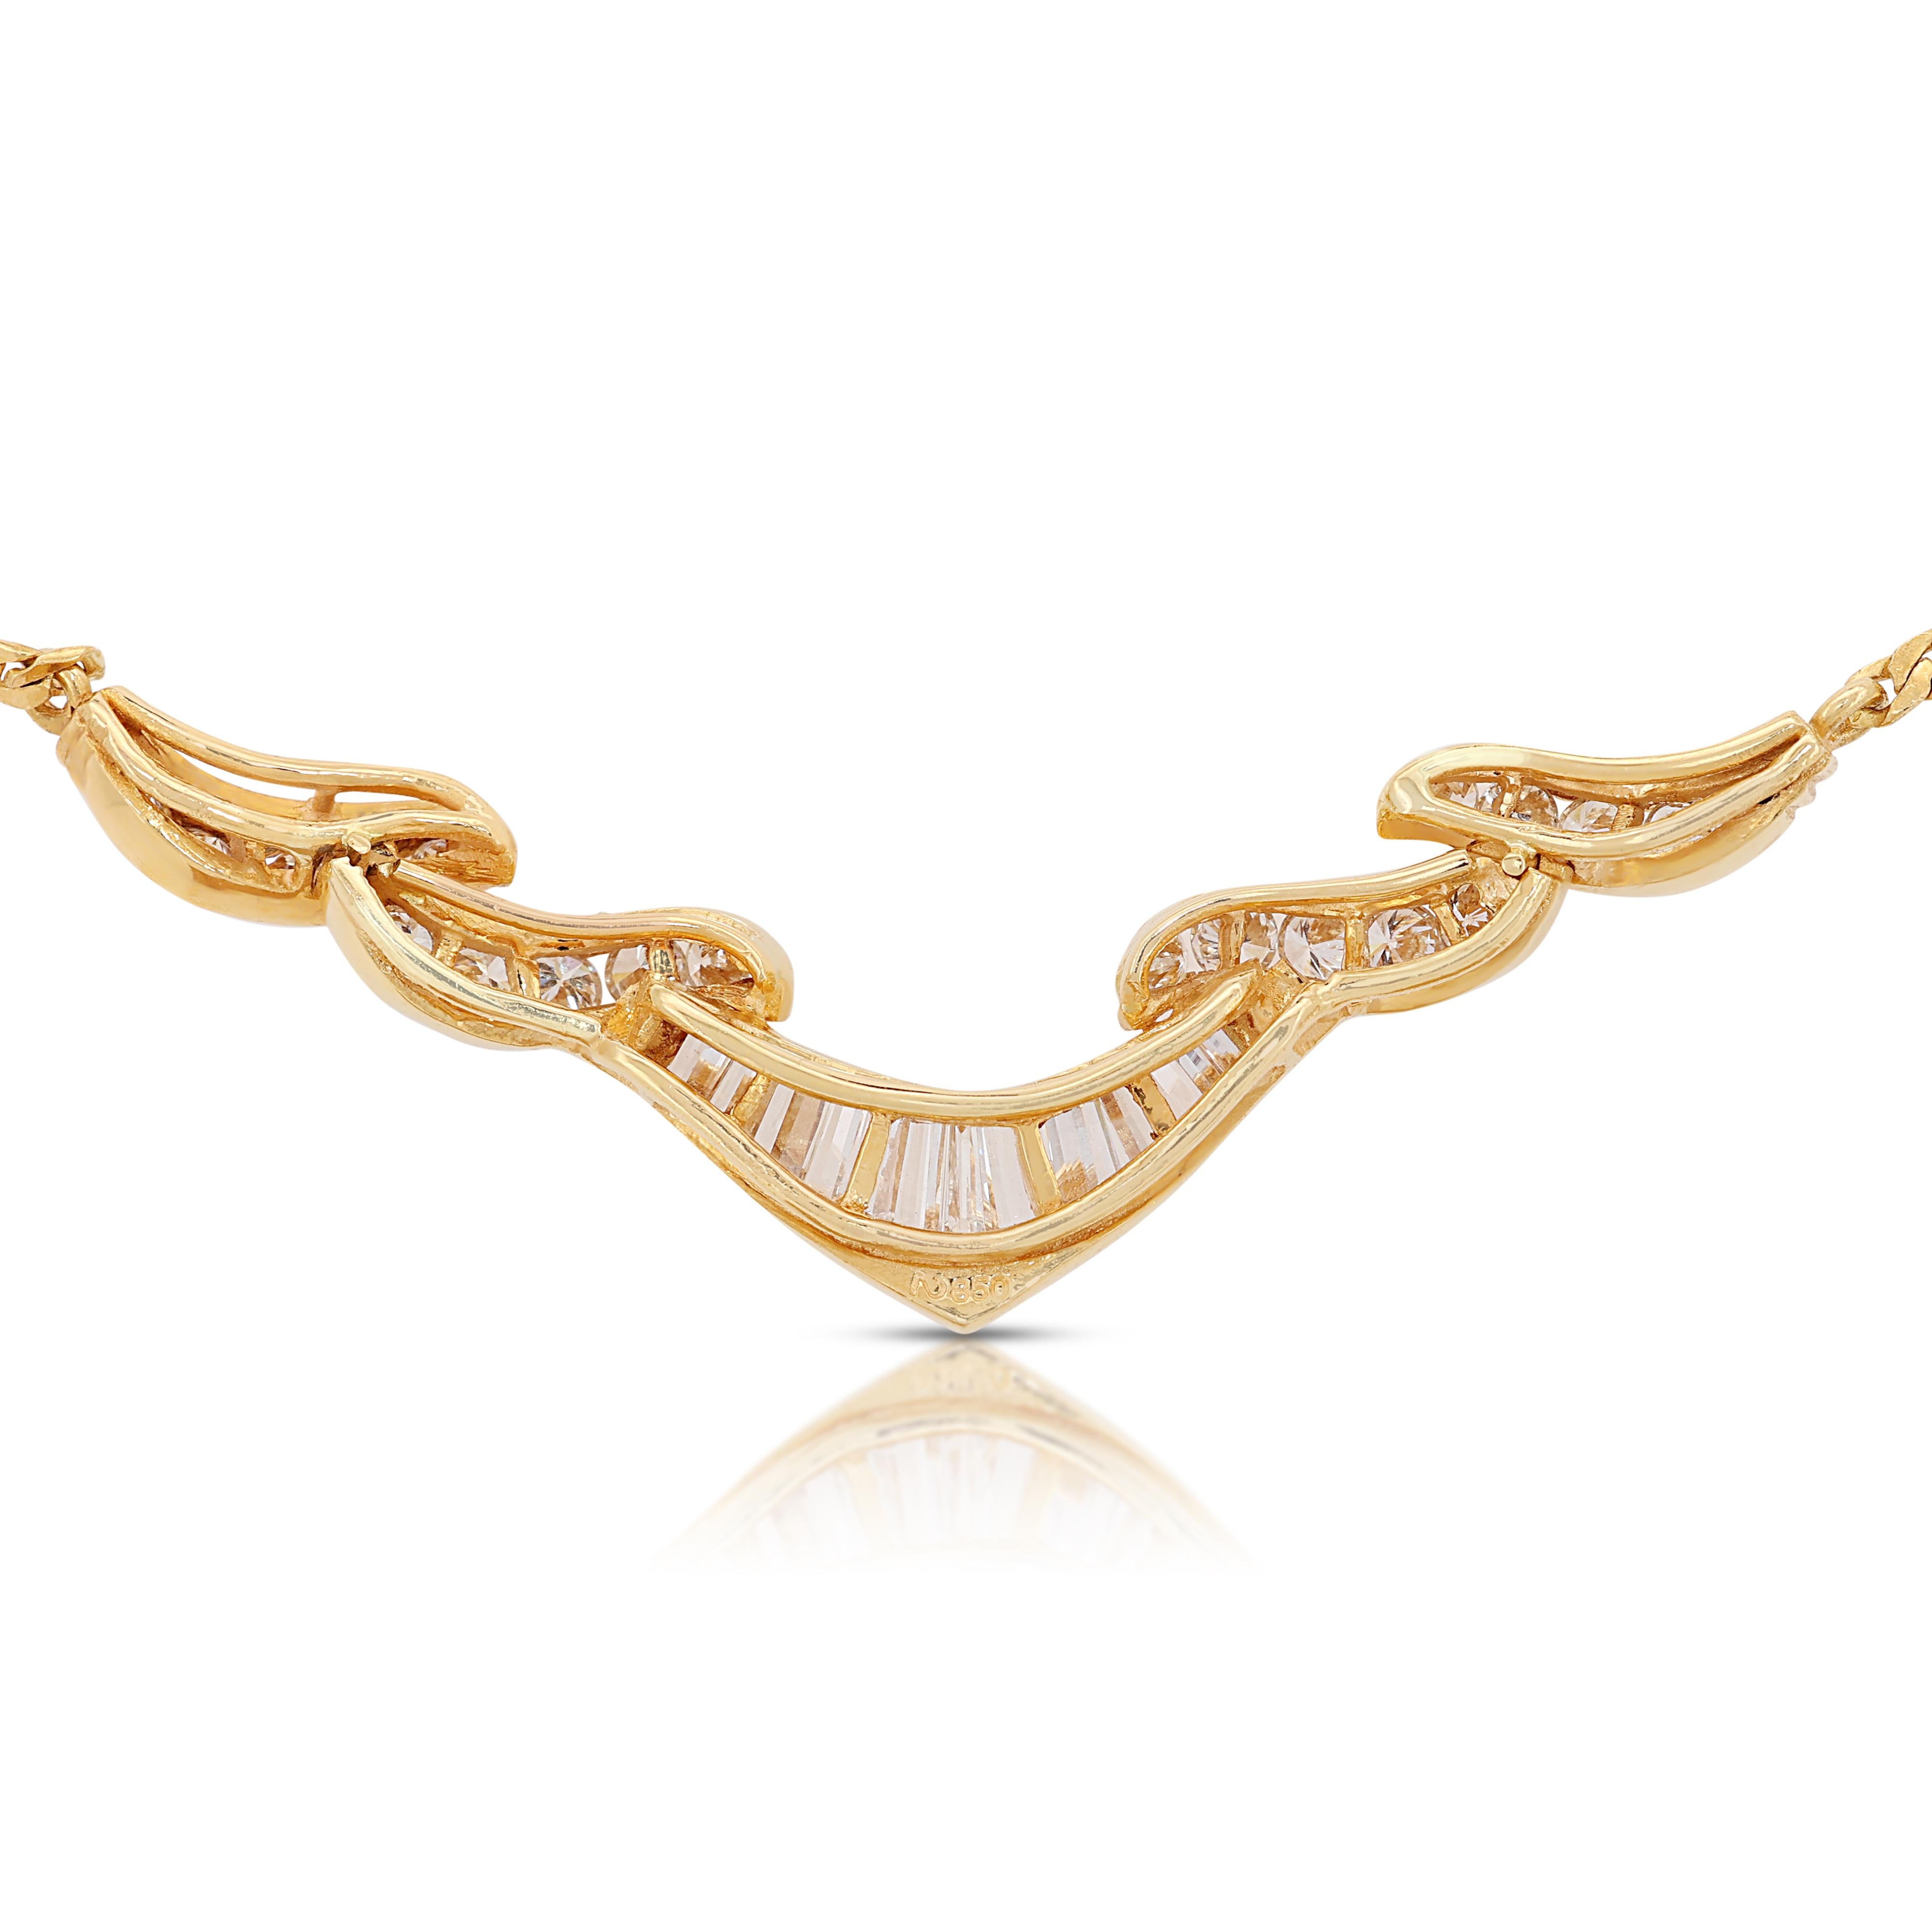 Fabulous 1.18ct Diamond Collar Necklace in 20K Yellow Gold In Excellent Condition For Sale In רמת גן, IL